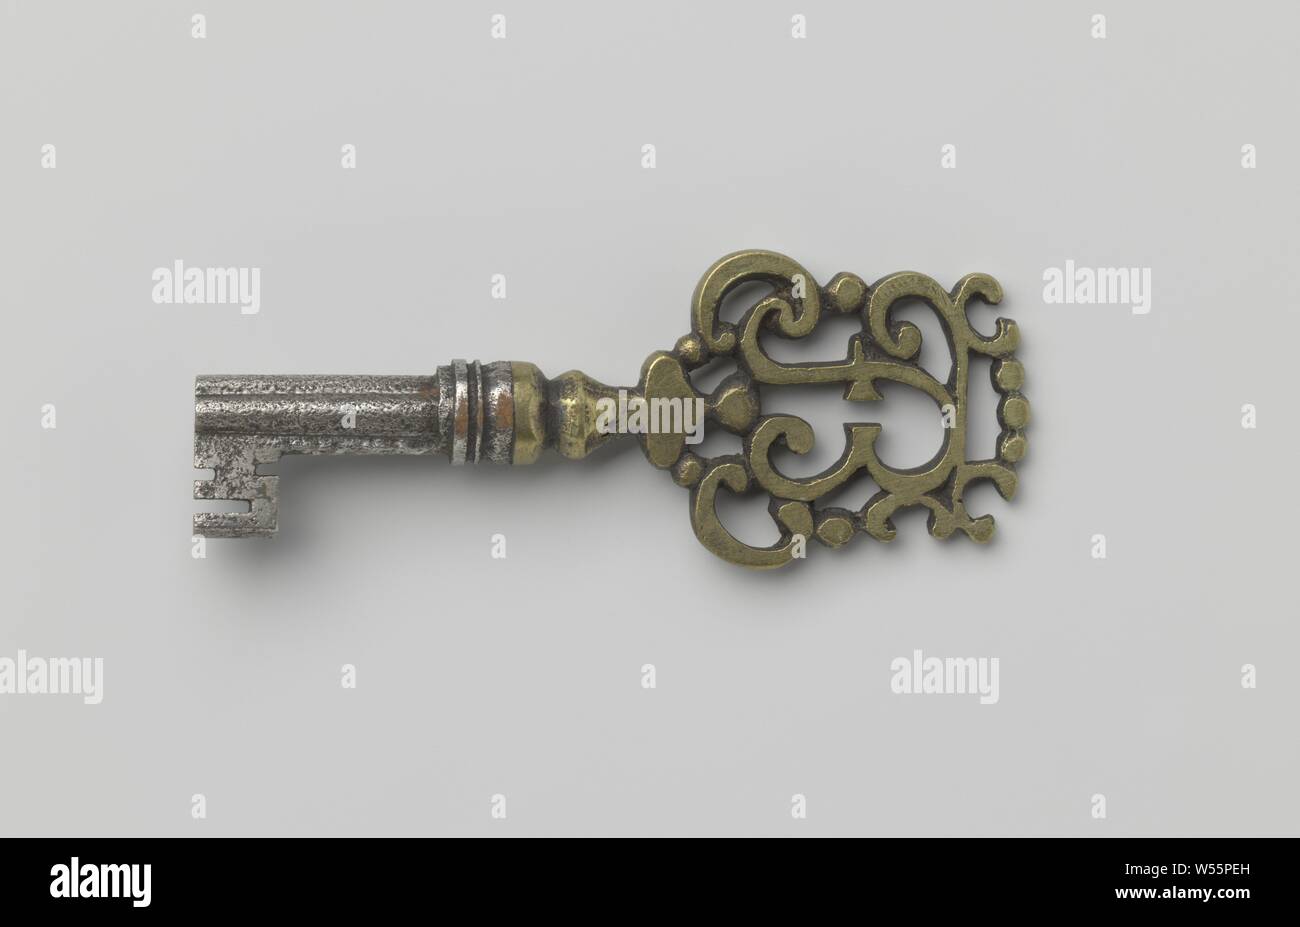 Pipe key whose grip is formed by the monogram F.B. The cloverleaf-shaped shaft is drilled cross-shaped. Handle of copper, shaft and beard of iron., c. 1700 - c. 1800, iron (metal), copper (metal), l 9.4 cm × w 3.6 cm Stock Photo